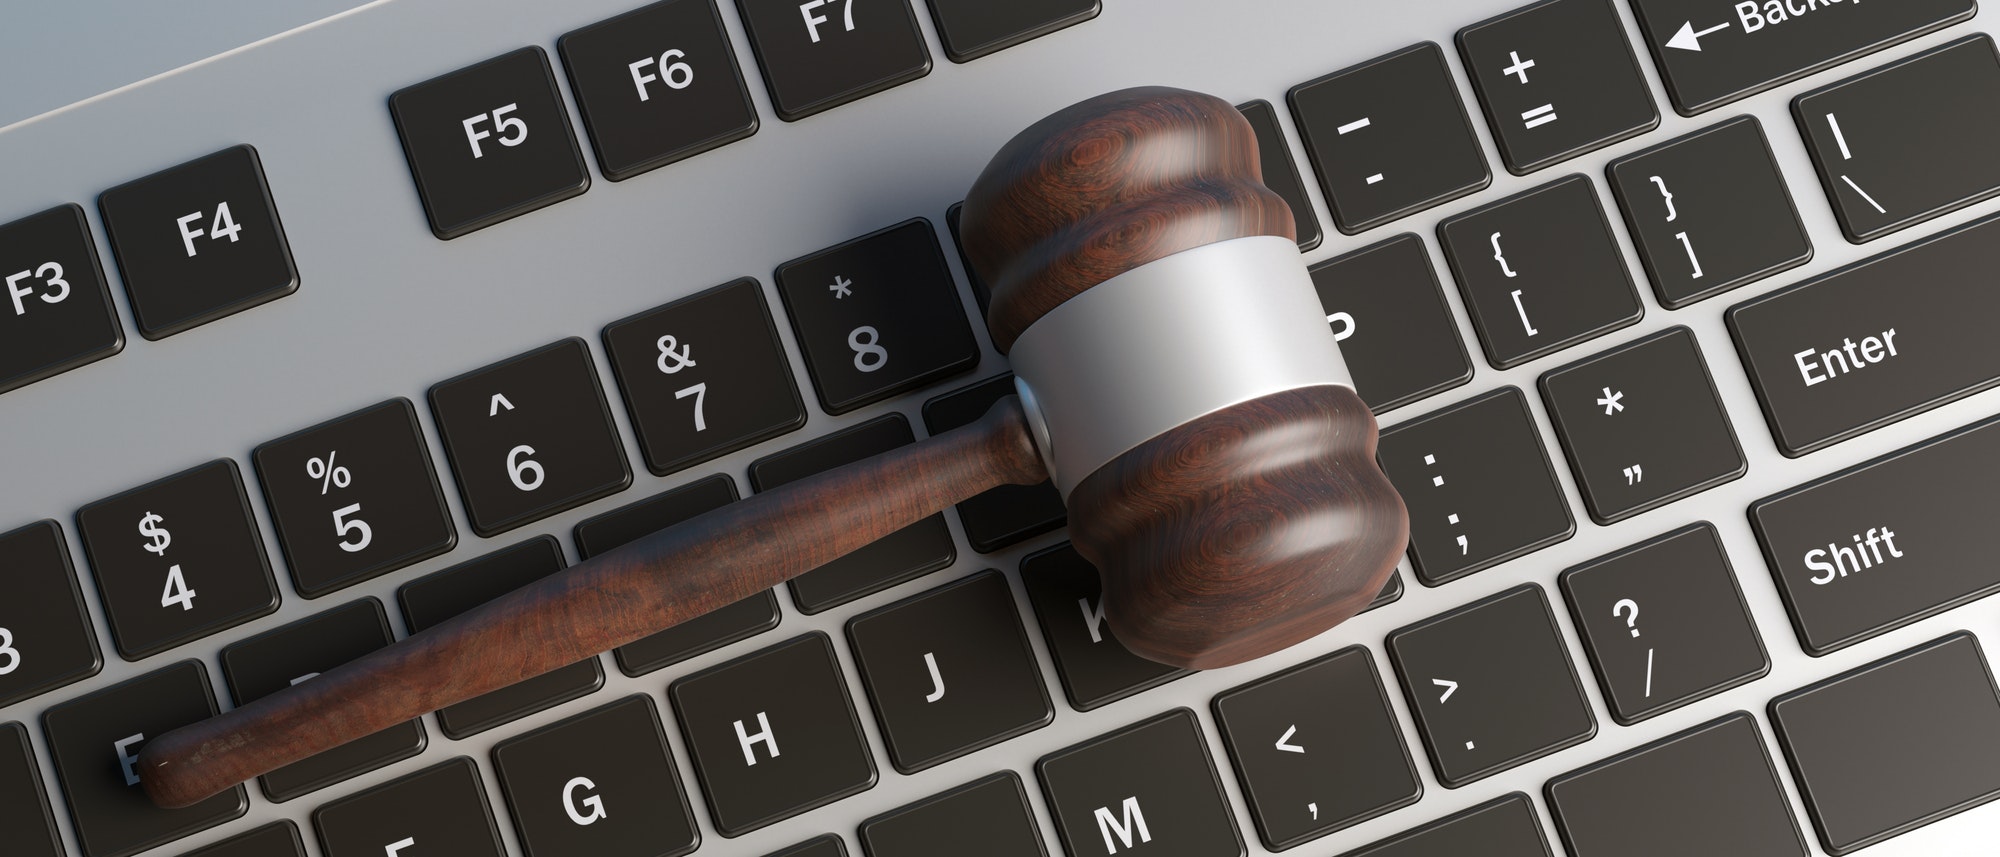 Cyber crime concept. Law gavel on computer keyboard, banner. Top view, 3d illustration